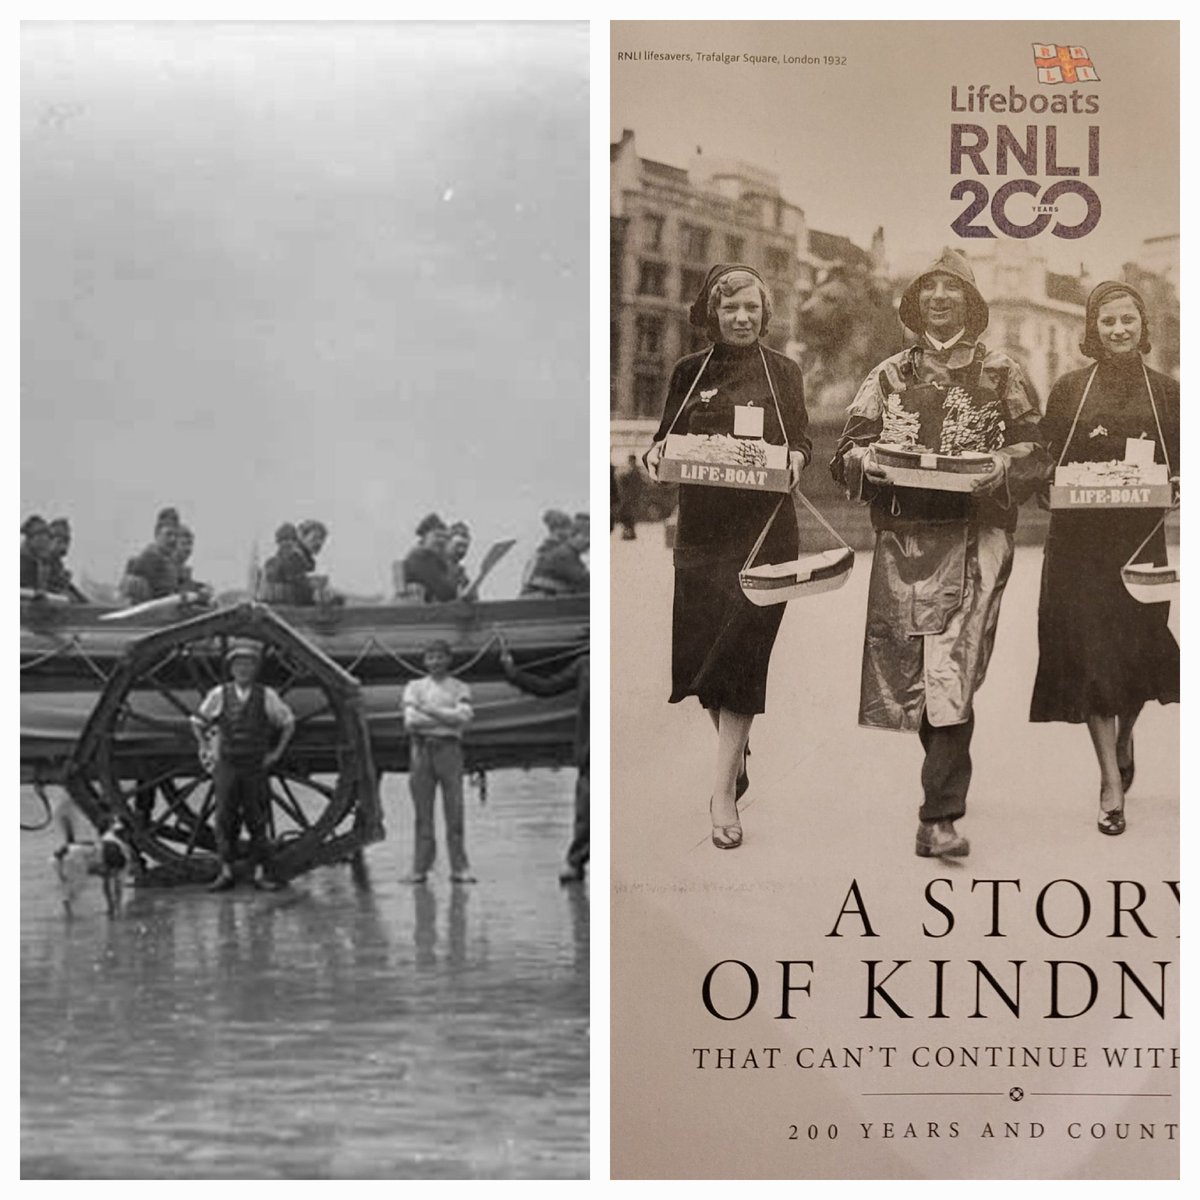 Delighted to receive this brochure from the @RNLI commemorating 200 hundred years saving lives at sea . The image on the left is of the Tramore #waterford boat from 1910.